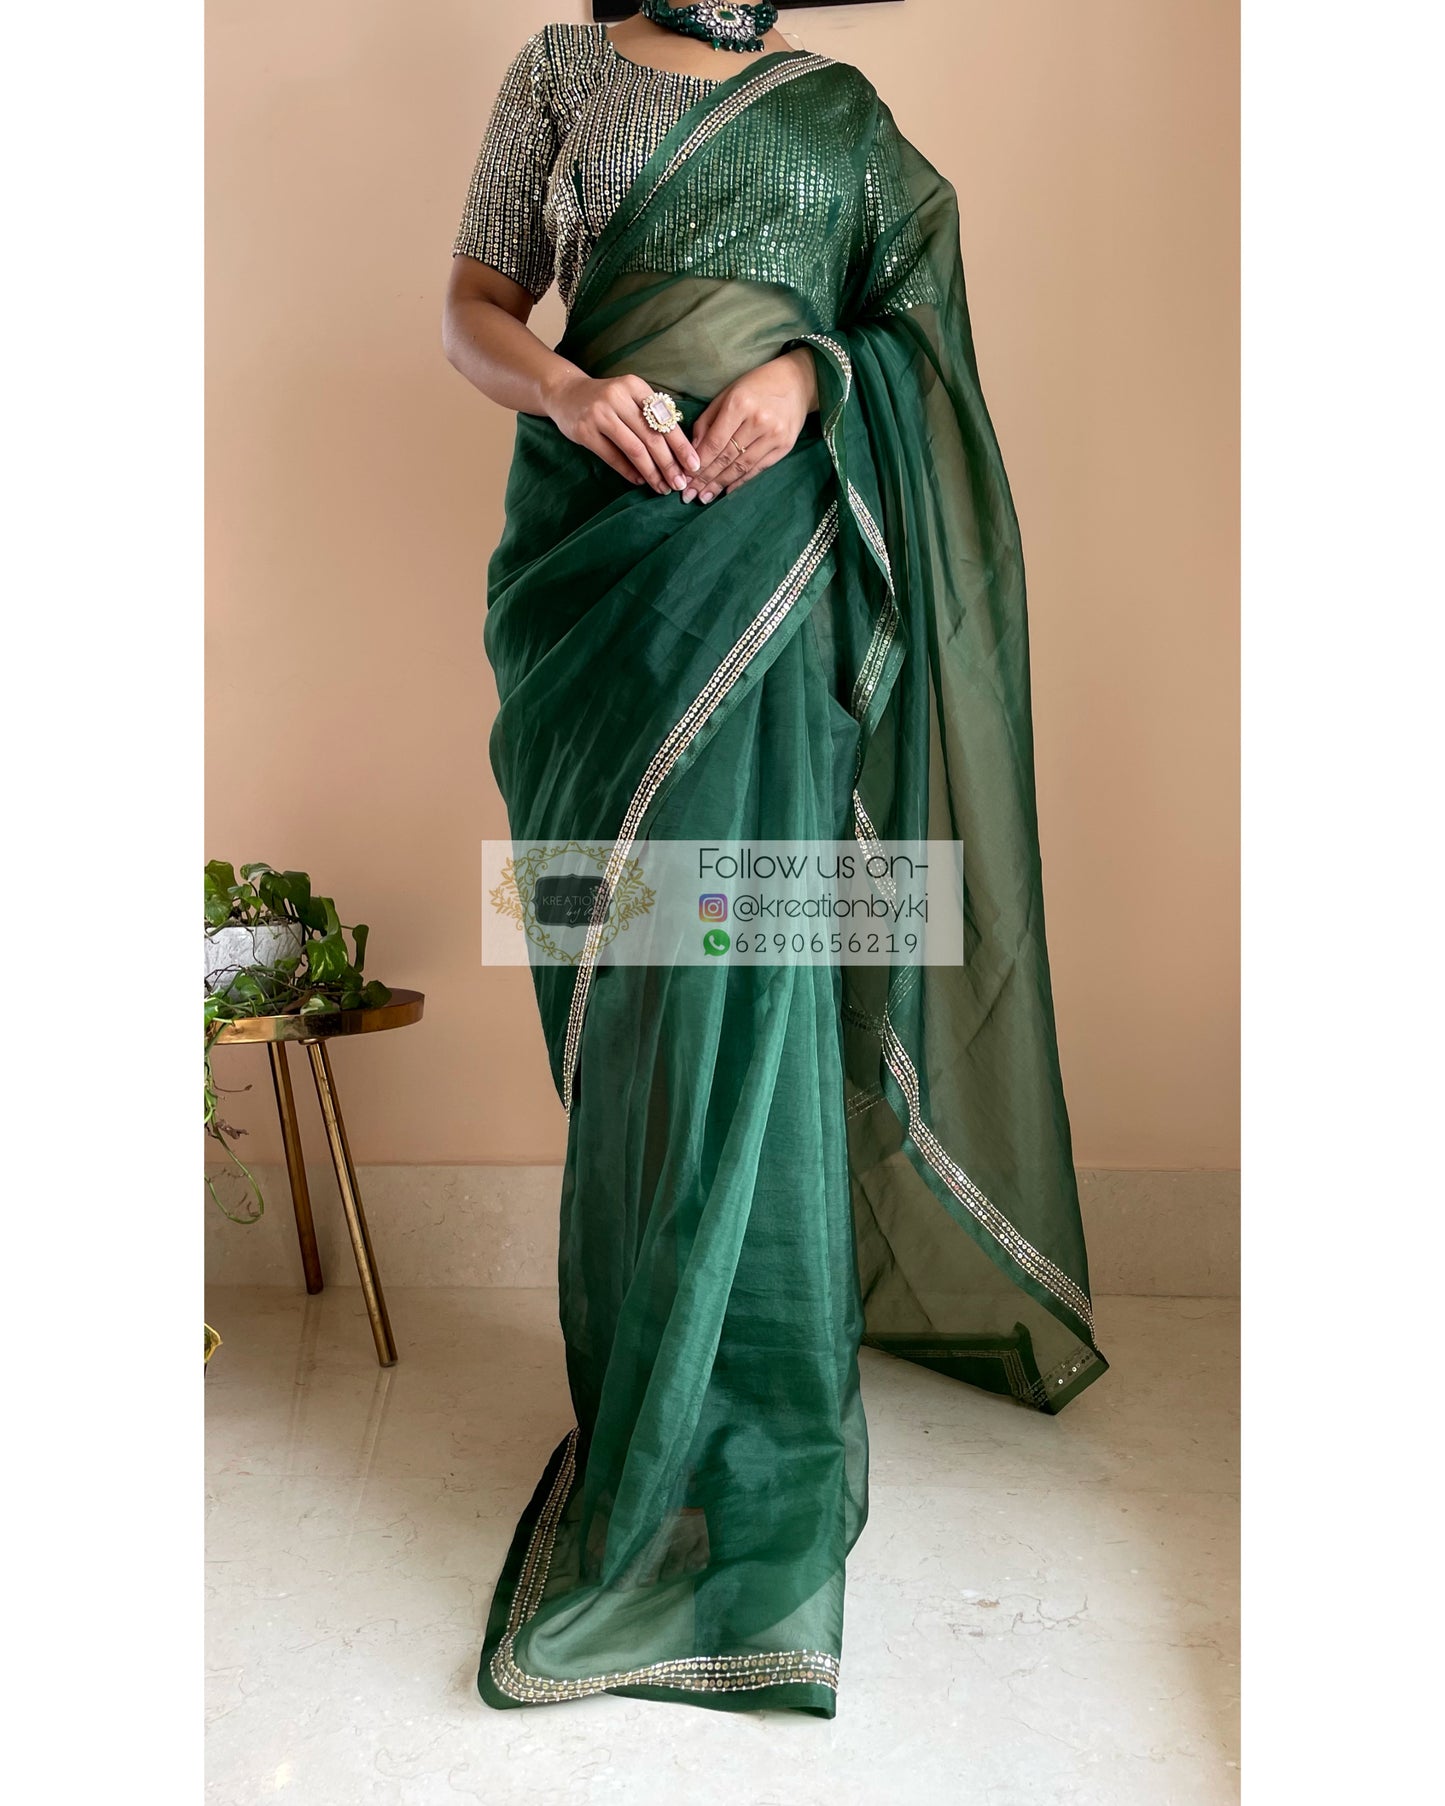 Bottle Green Organza Saree with Heavy Blouse - kreationbykj